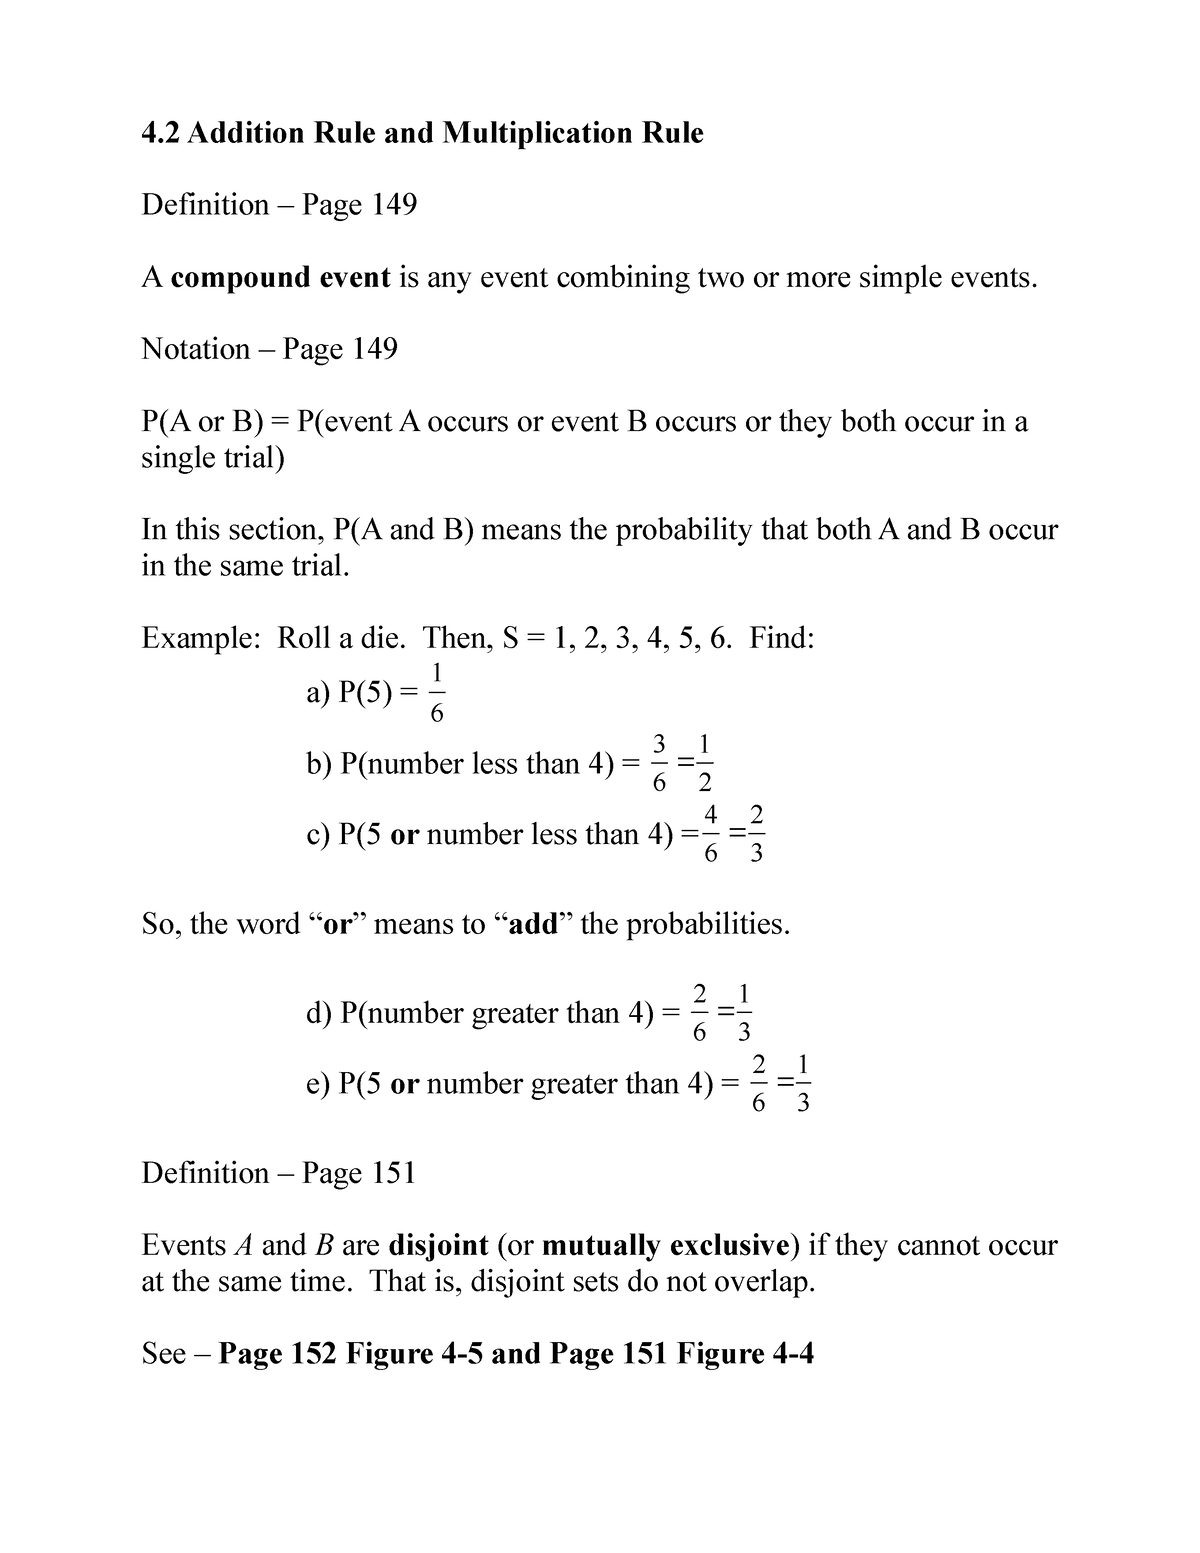 chapter-4-notes-13th-ed-section-4-2-and-4-3-4-addition-rule-and